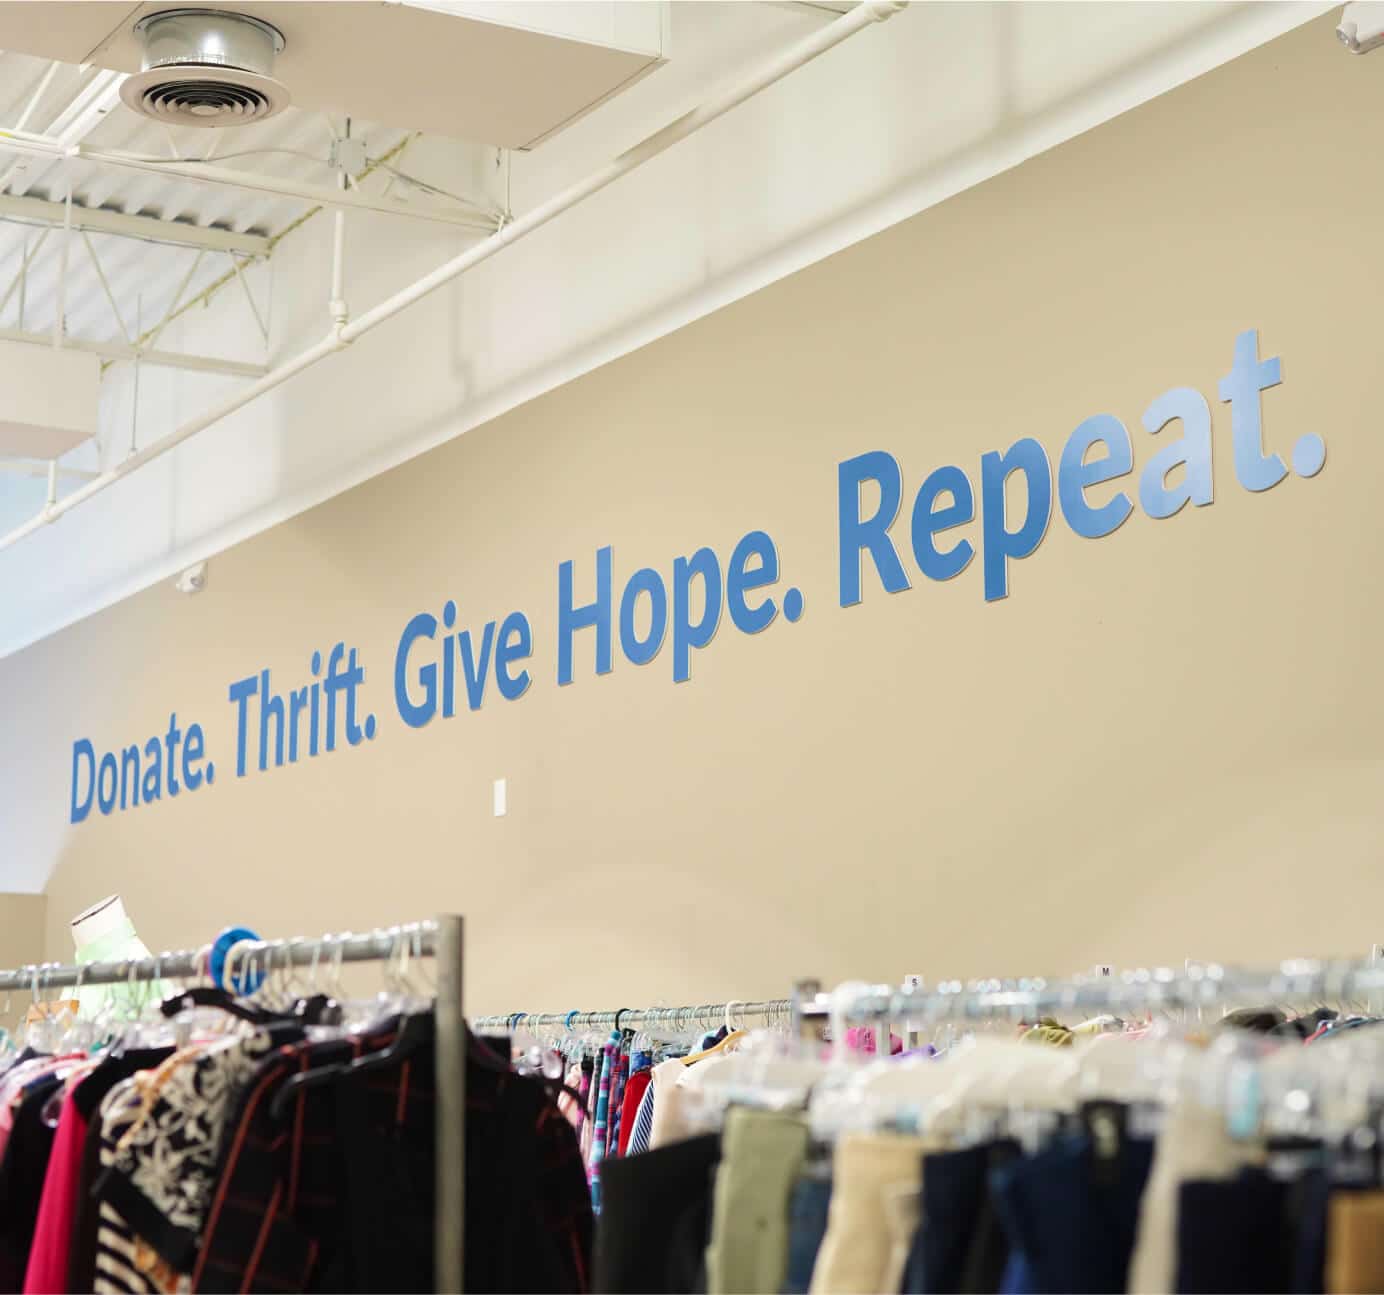 Donate. Thrift. Give Hope. Repeat.